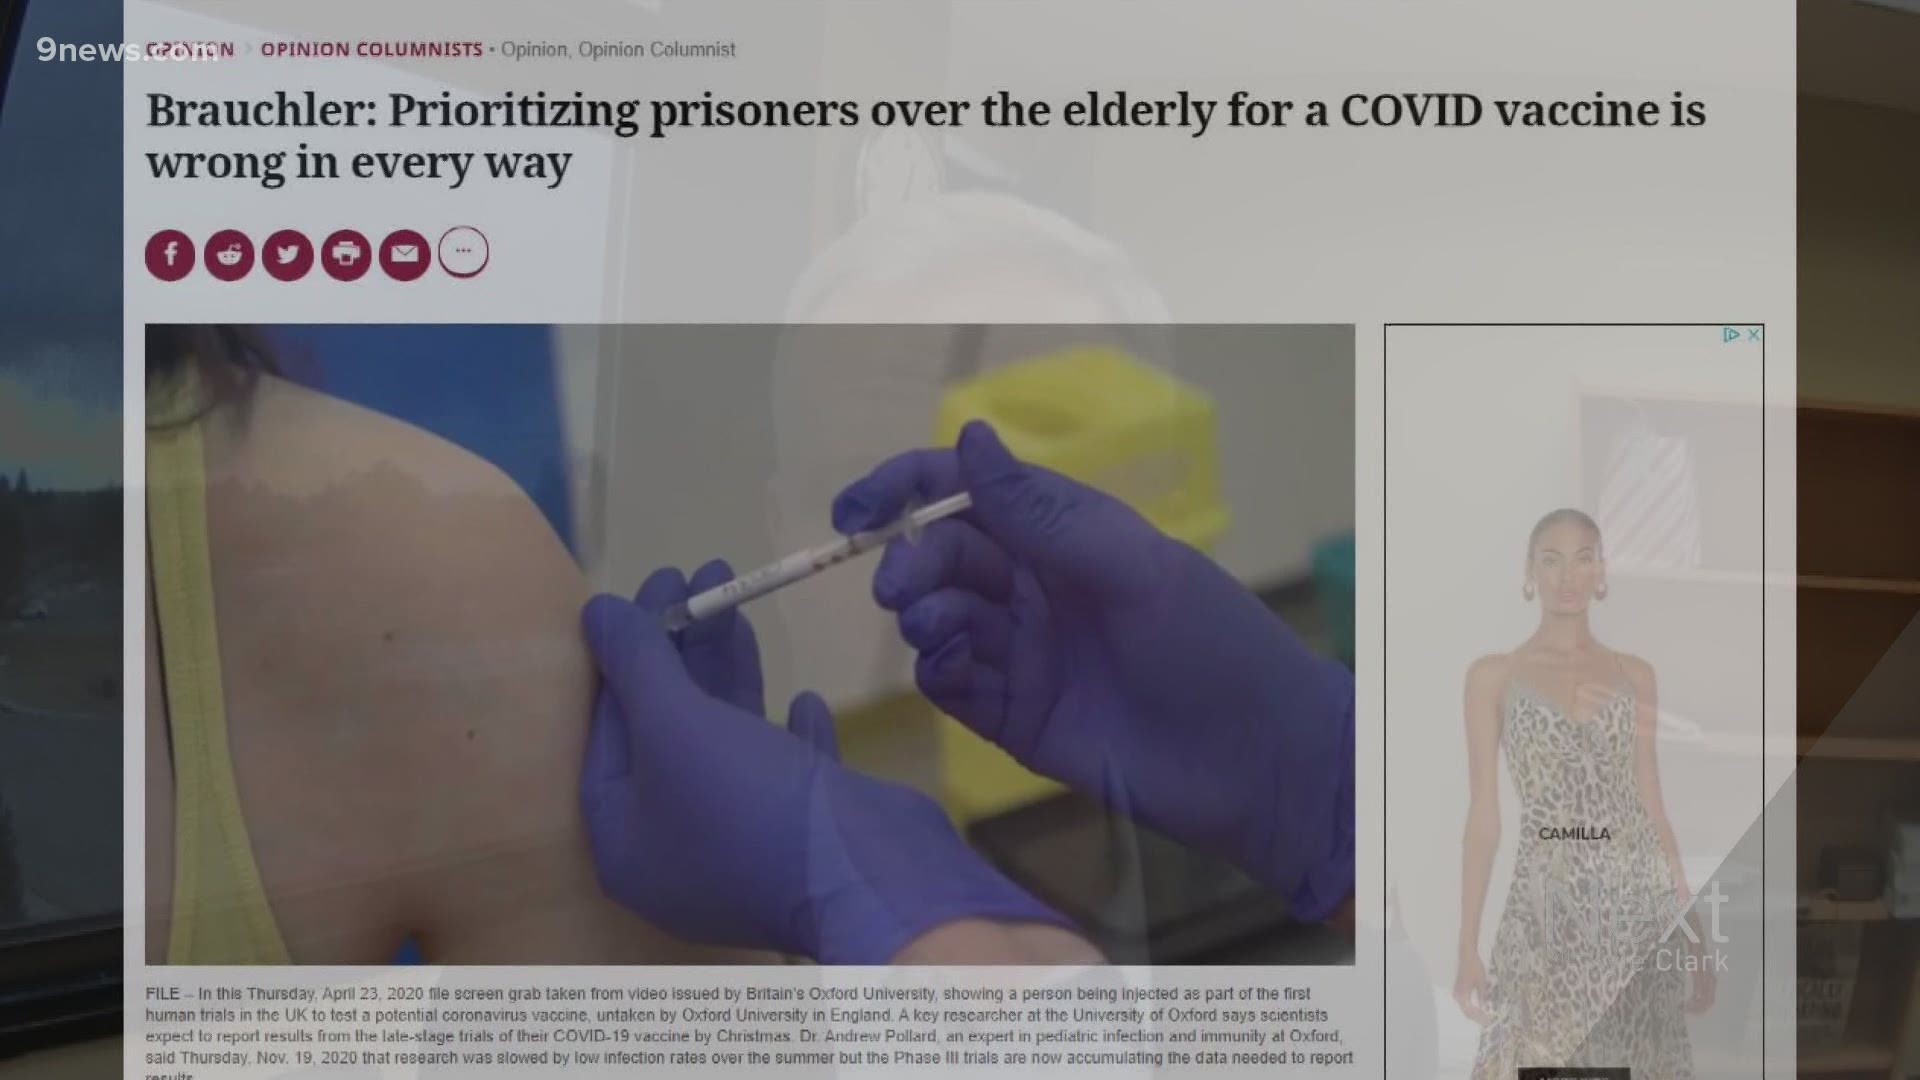 They will be the first inmates in Colorado to receive the COVID-19 vaccine after months of political pressure and adaptations to the priority schedule.